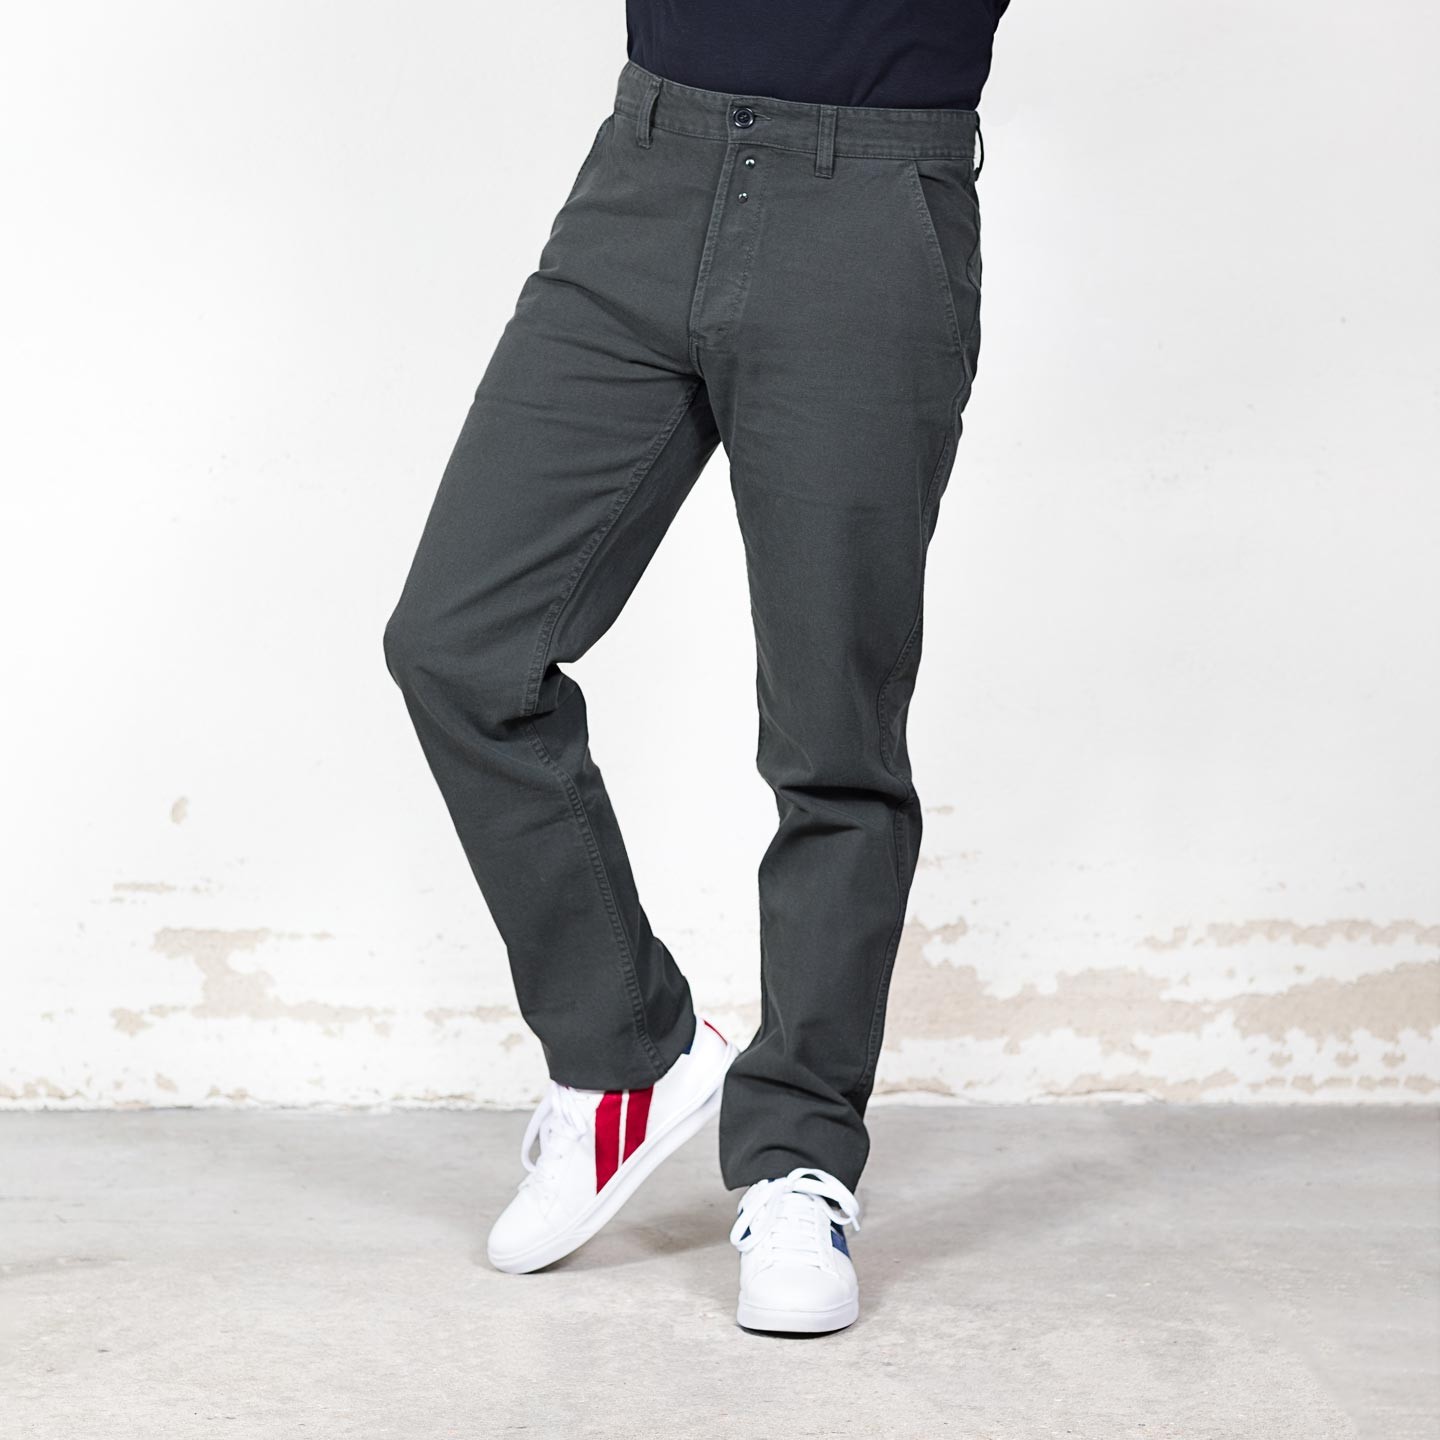 Japanese Charcoal Melange Stretch Cotton Chino - Custom Fit Pants